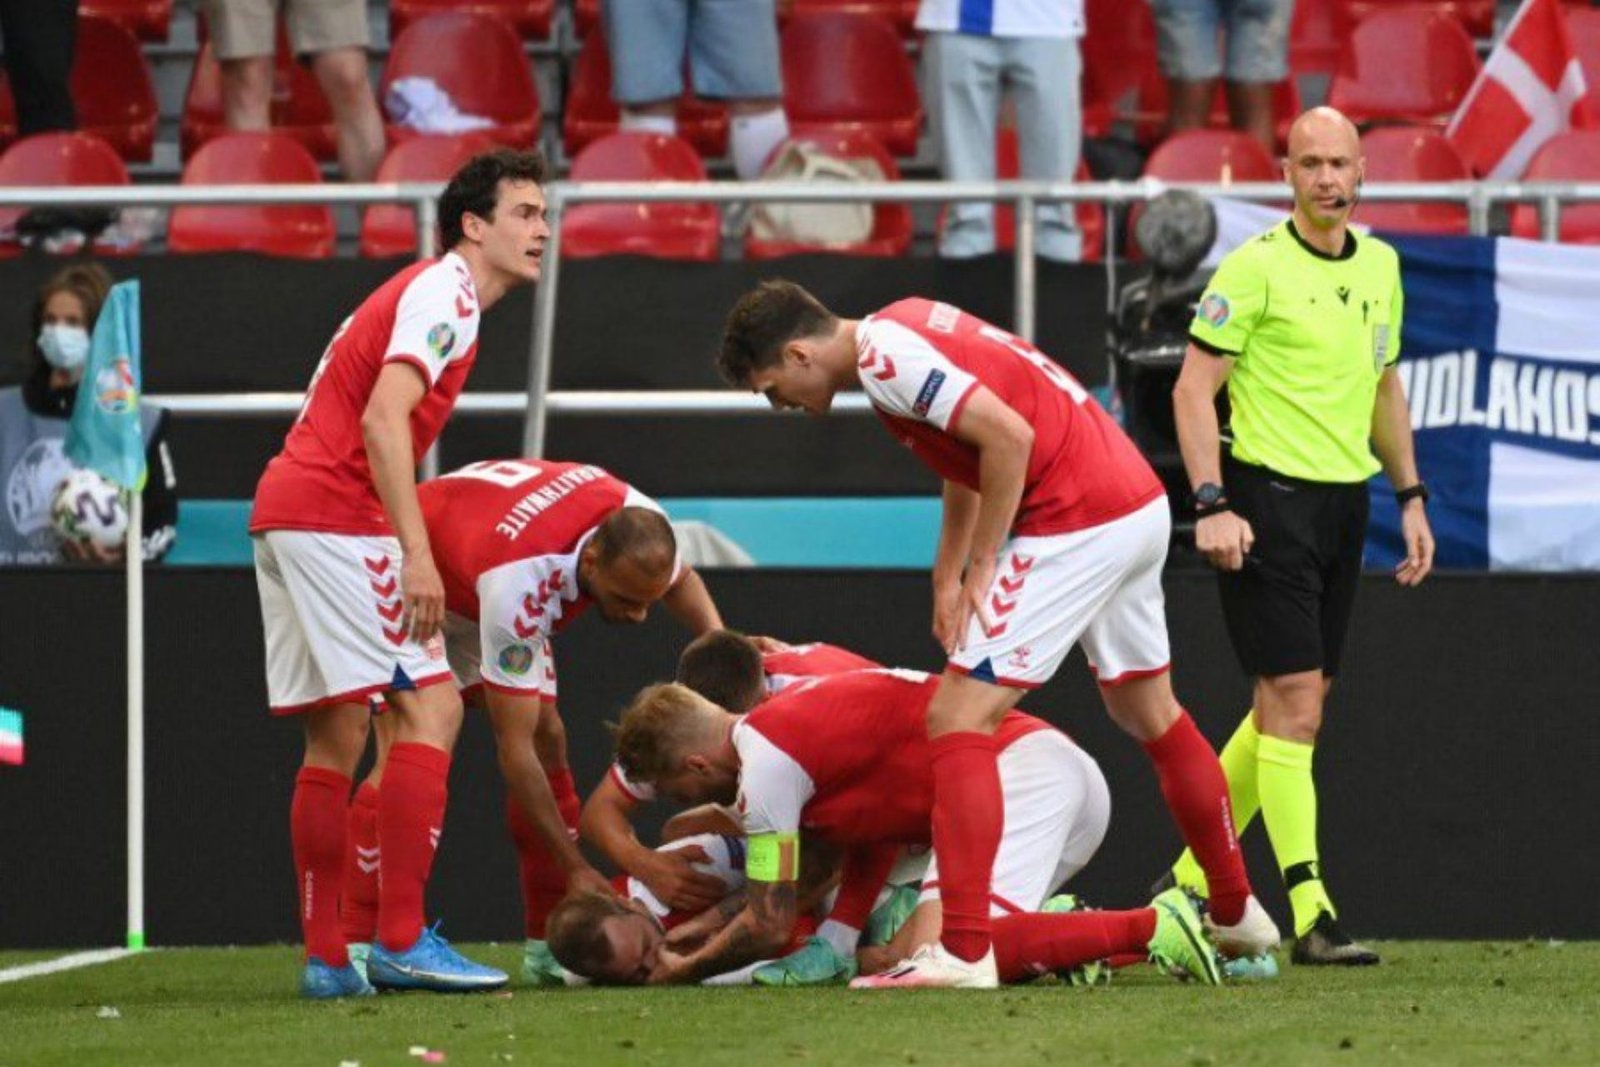 Eriksen Of Denmark Rushed To Hospital After Collapsing In Euro 2020 Game.